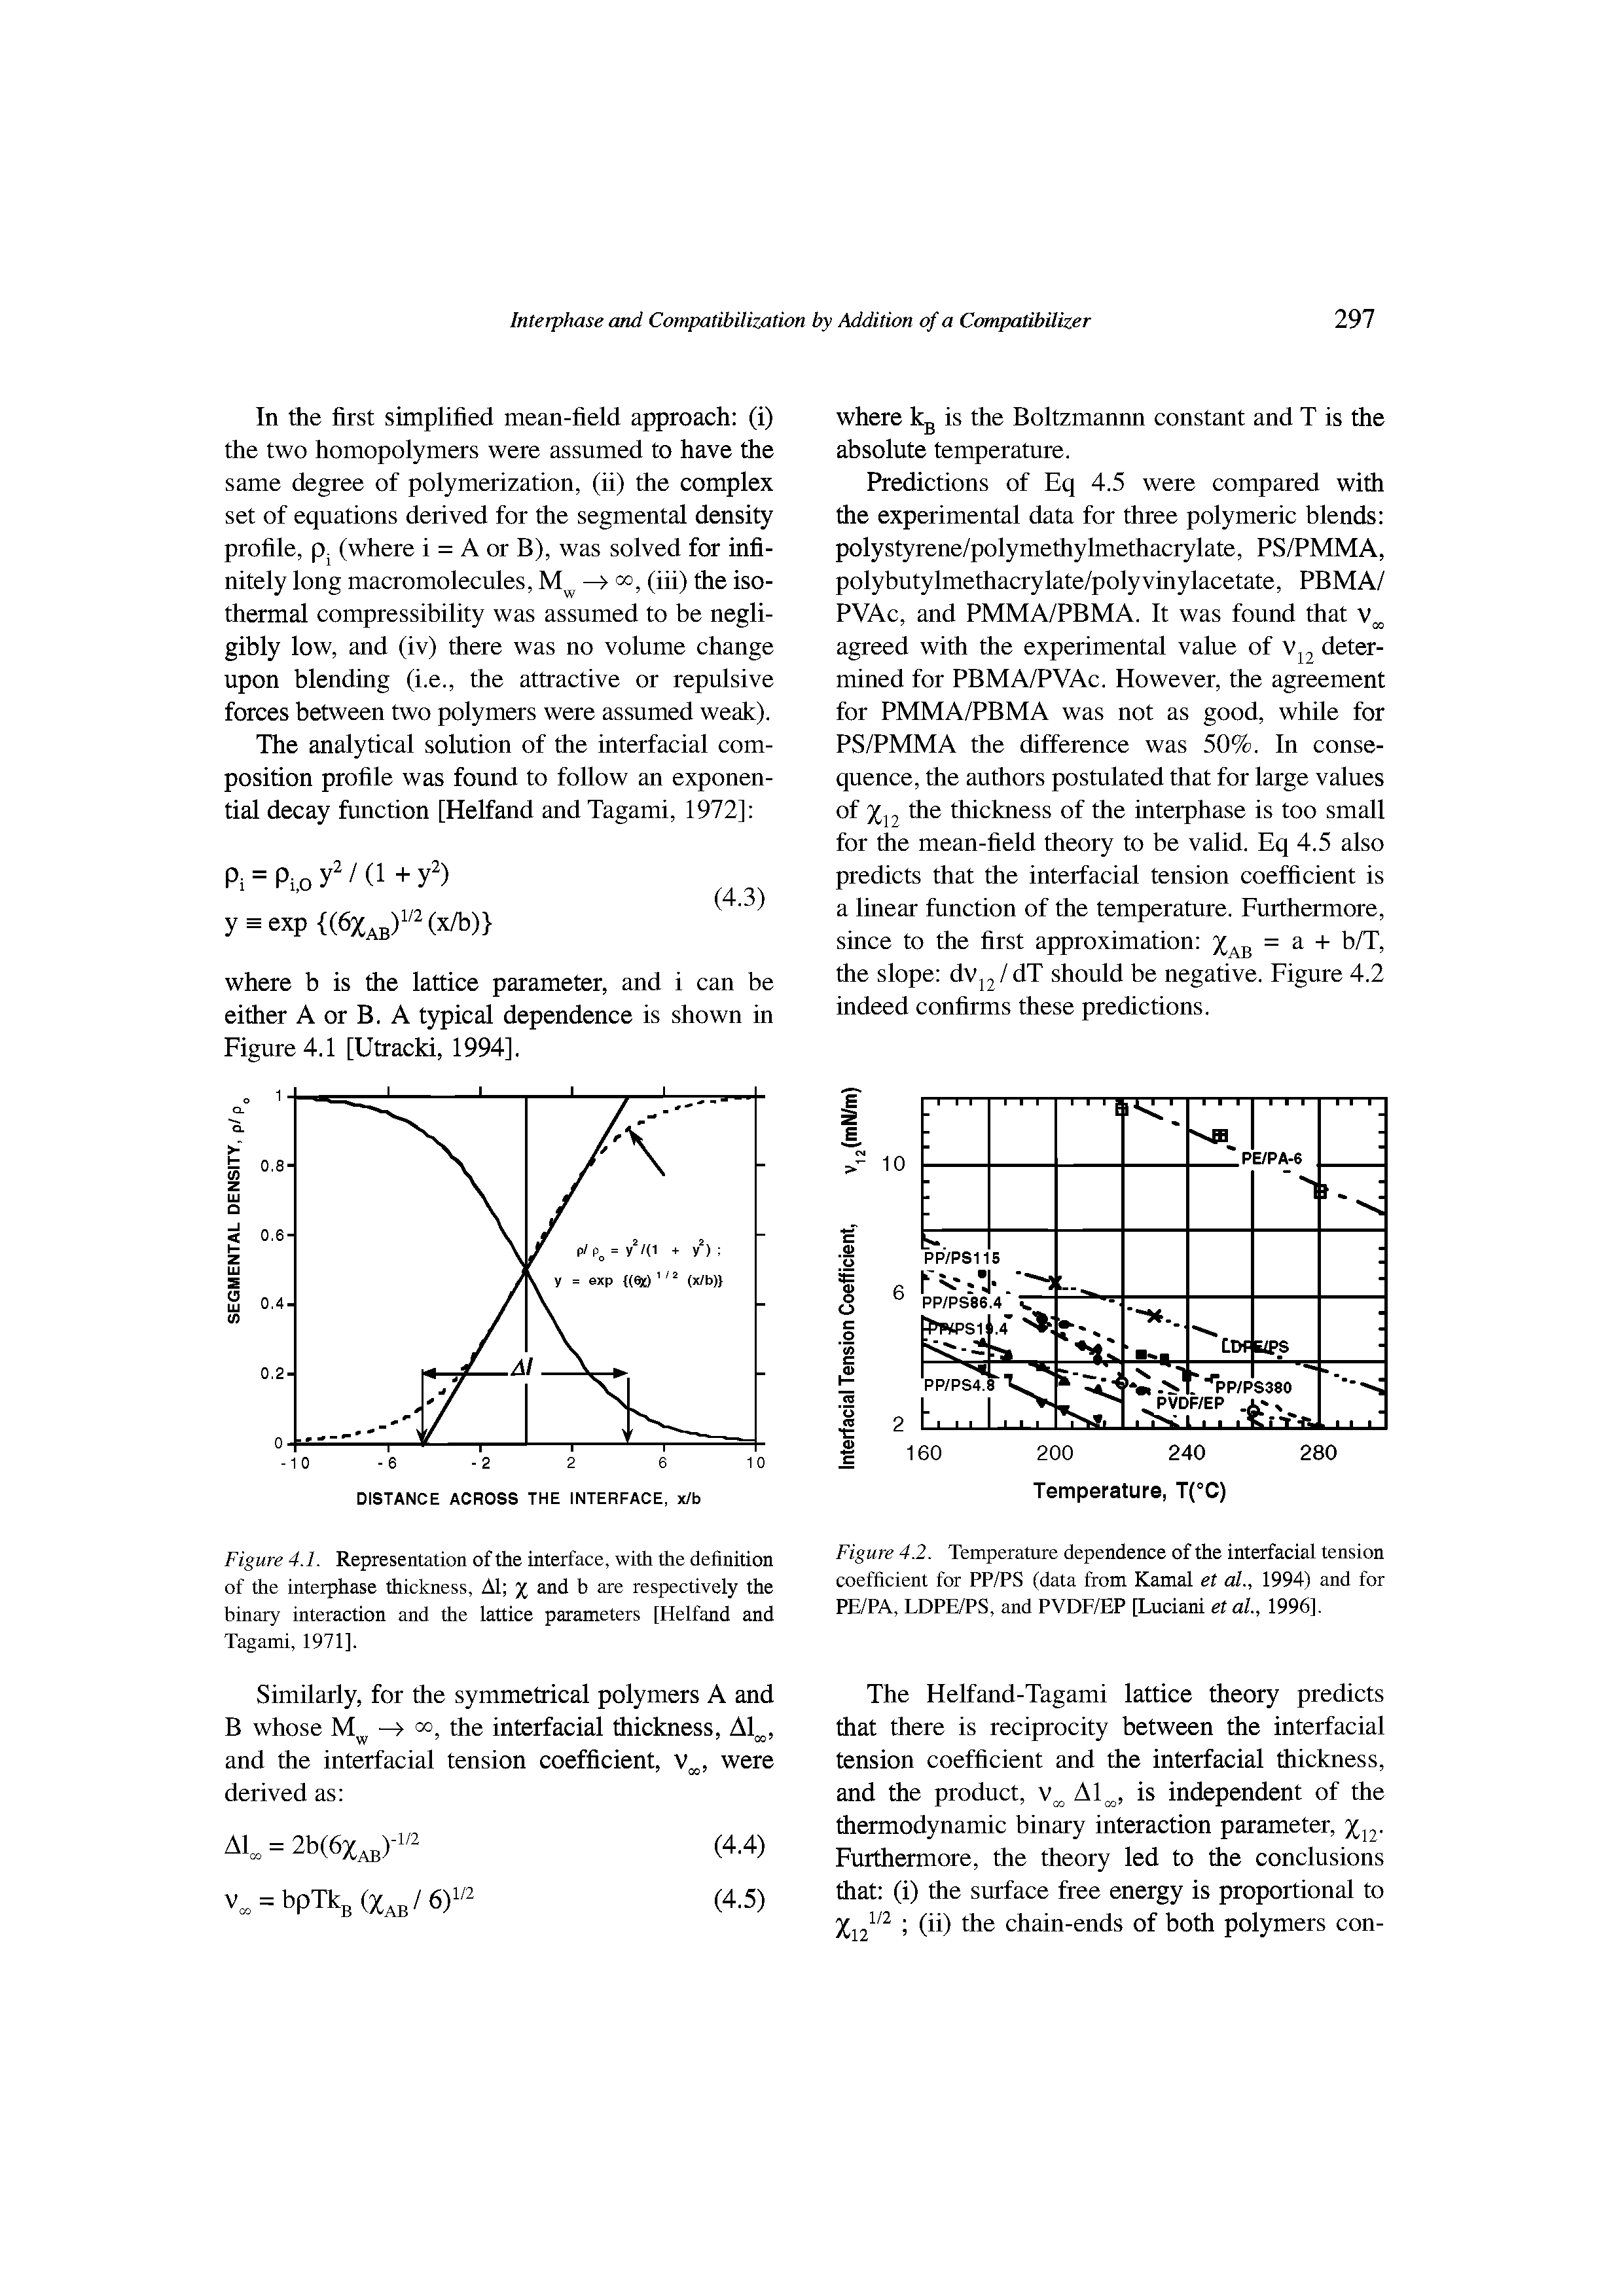 Figure 4.1. Representation of the interface, with the definition of the interphase thickness, Al % and b are respectively the binary interaction and the lattice parameters [Helfand and Tagami, 1971].